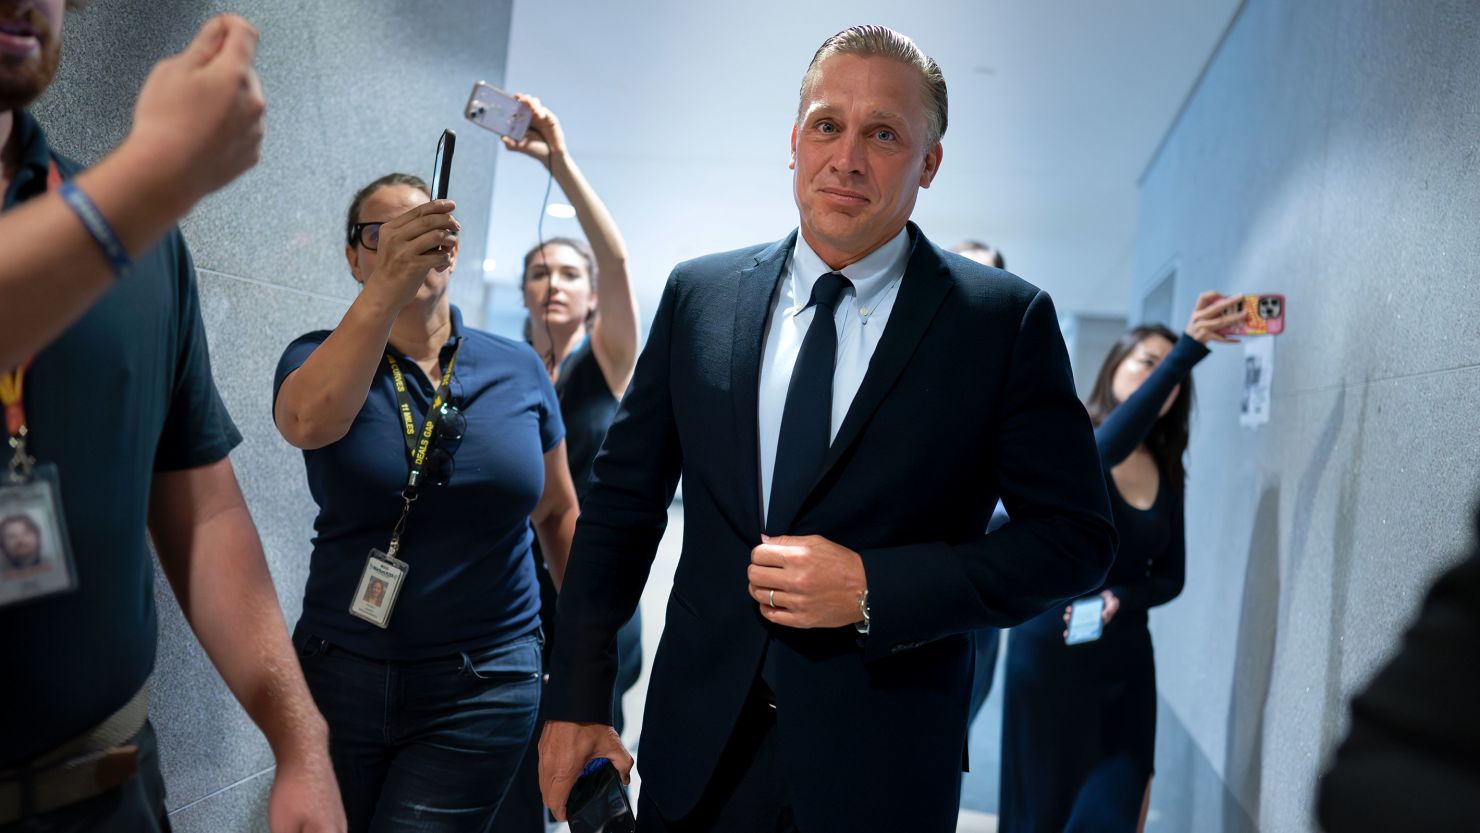 Devon Archer, Hunter Biden's former business partner, is pursued by reporters as he arrives on Capitol Hill to give closed-door testimony to the House Oversight Committee in the Republican-led investigations into President Biden's son, in Washington, Monday, July 31, 2023.